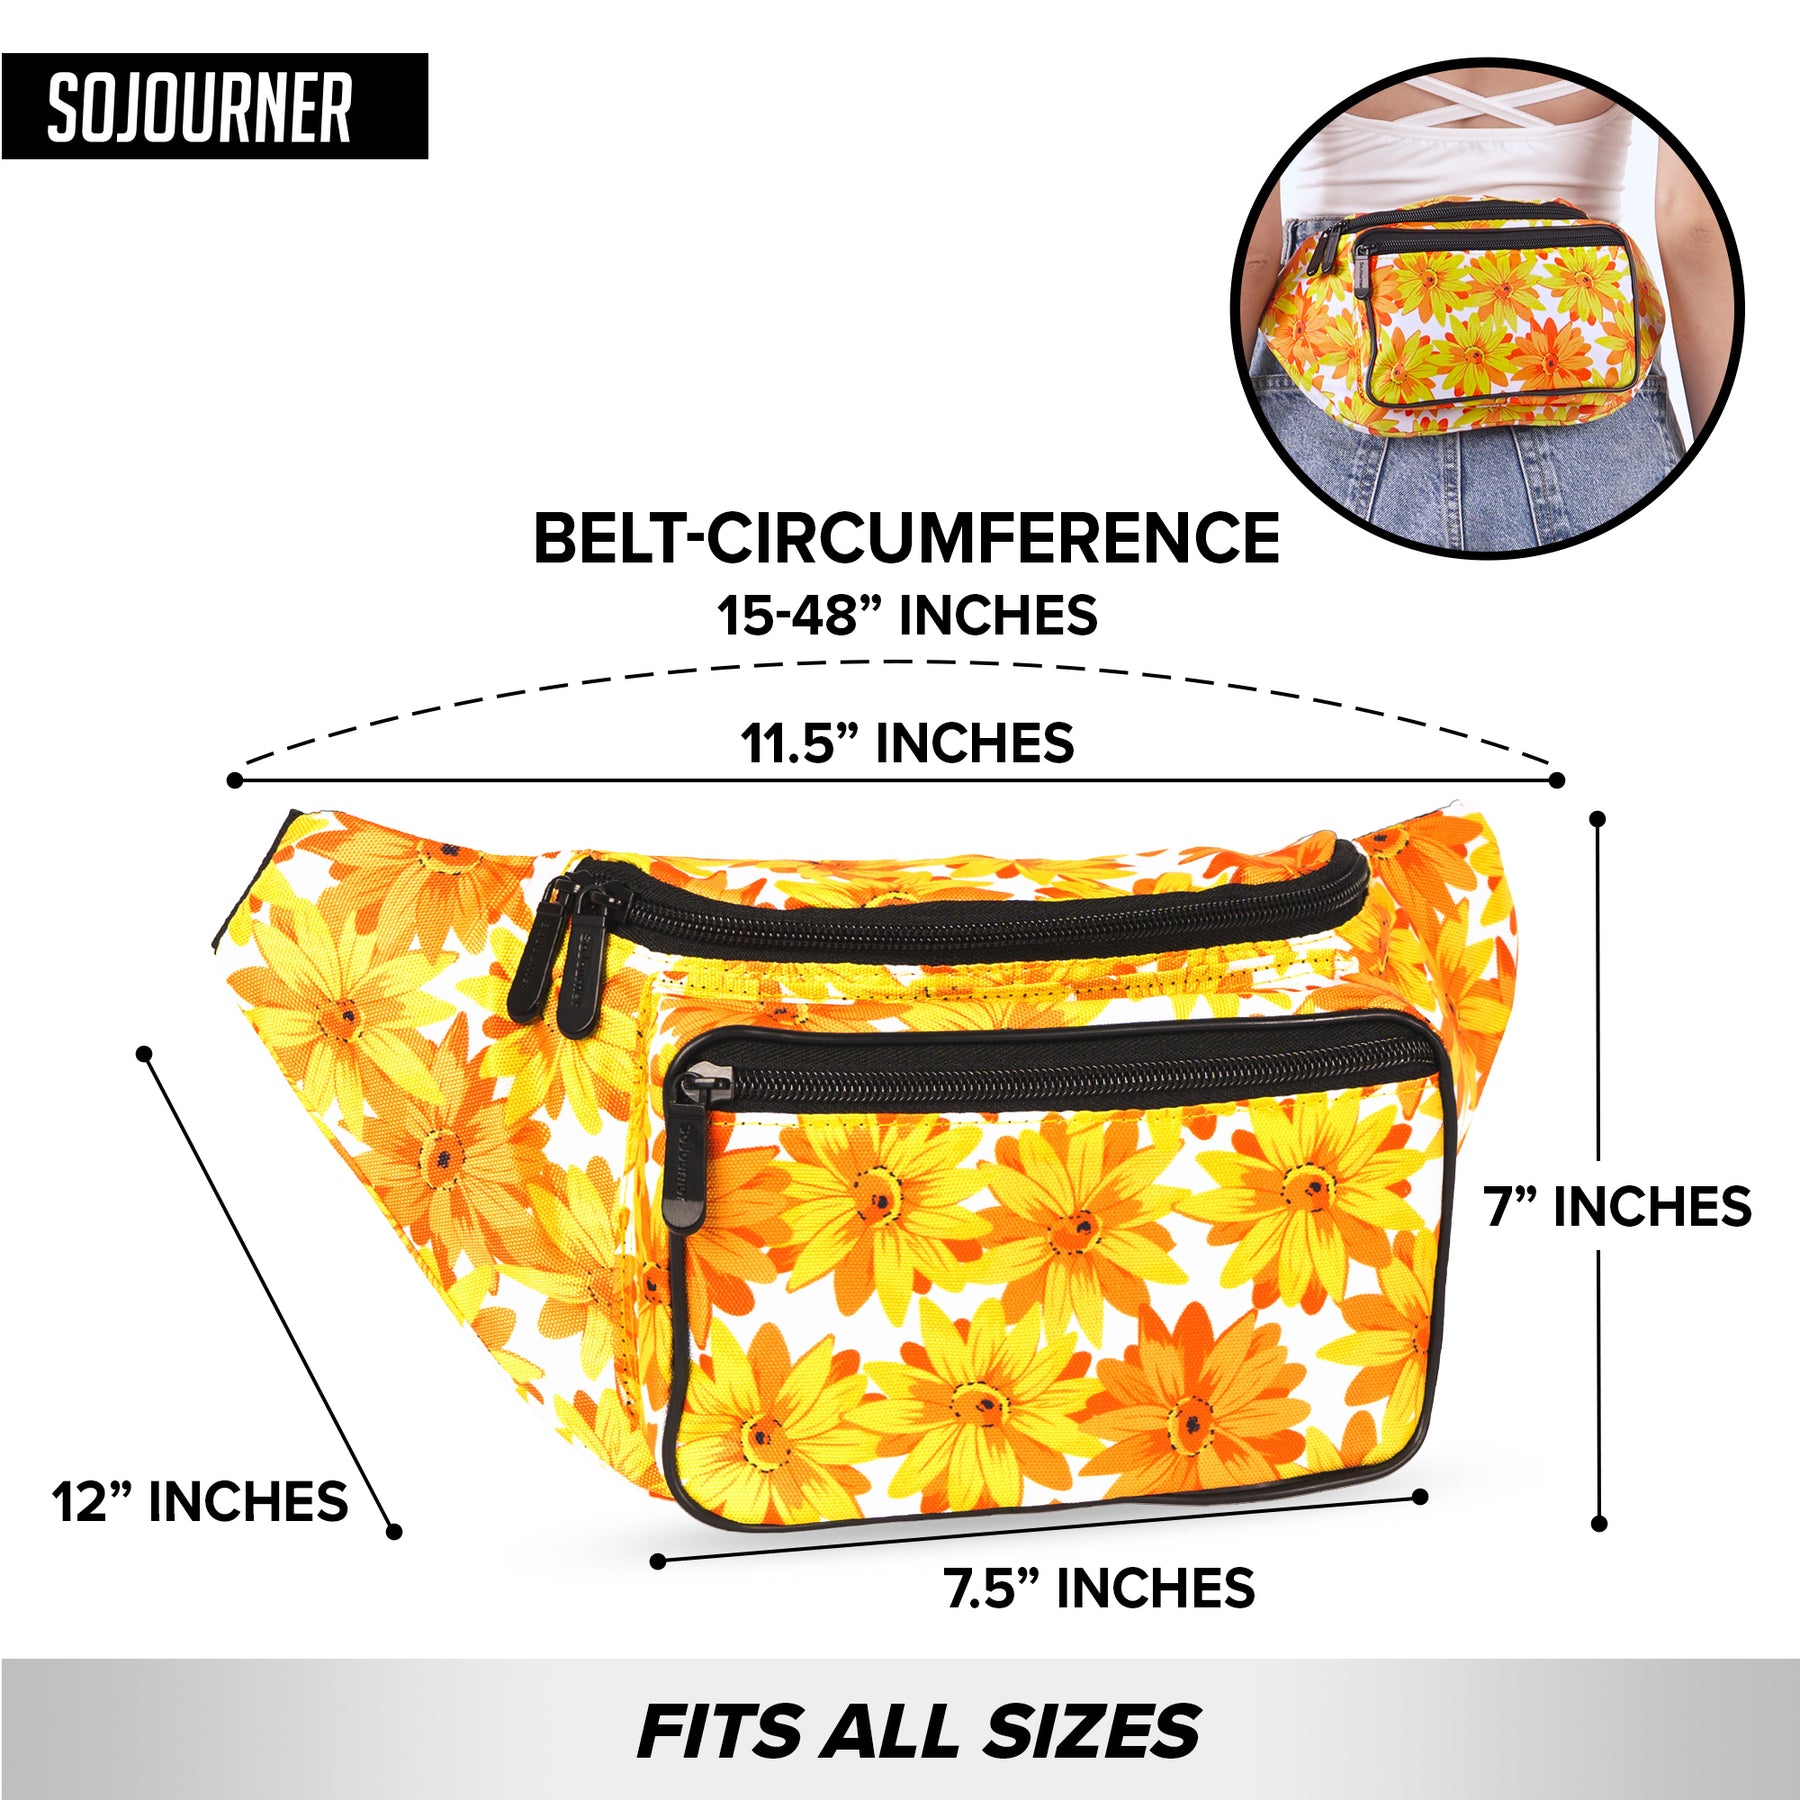 Floral Sunflower Fanny Pack (Yellow / Orange)